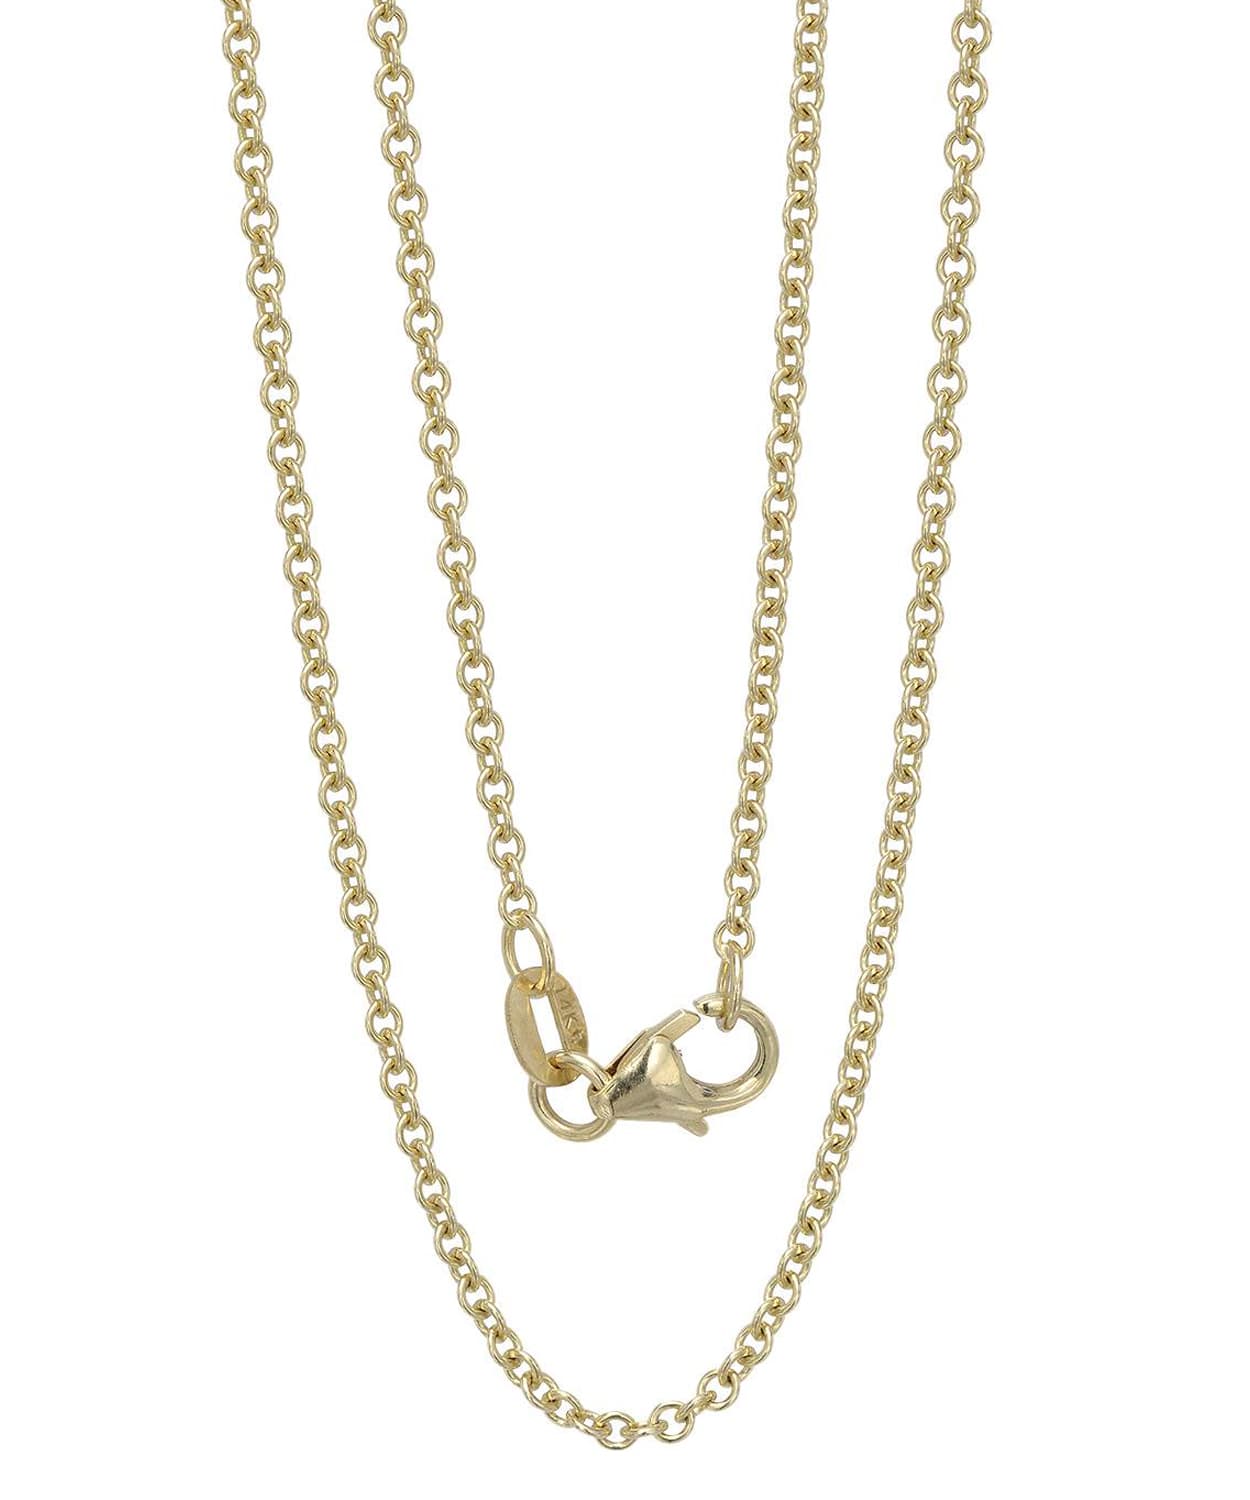 ESEMCO 1.8mm 14K Yellow Gold Rolo Chain View 2